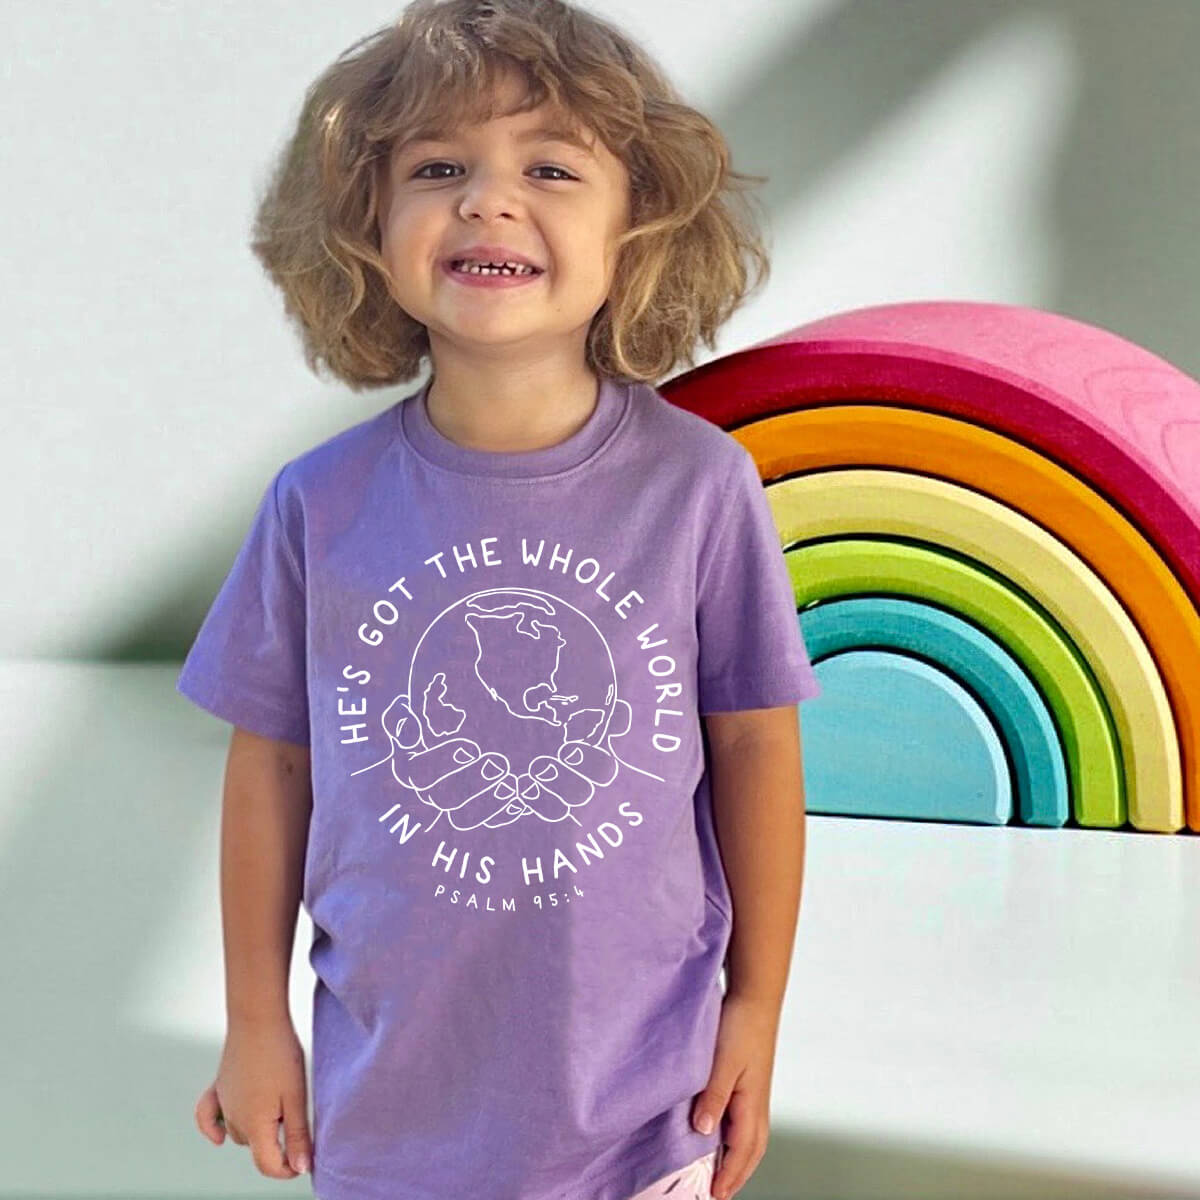 He's Got The Whole World In His Hands Toddler T Shirt